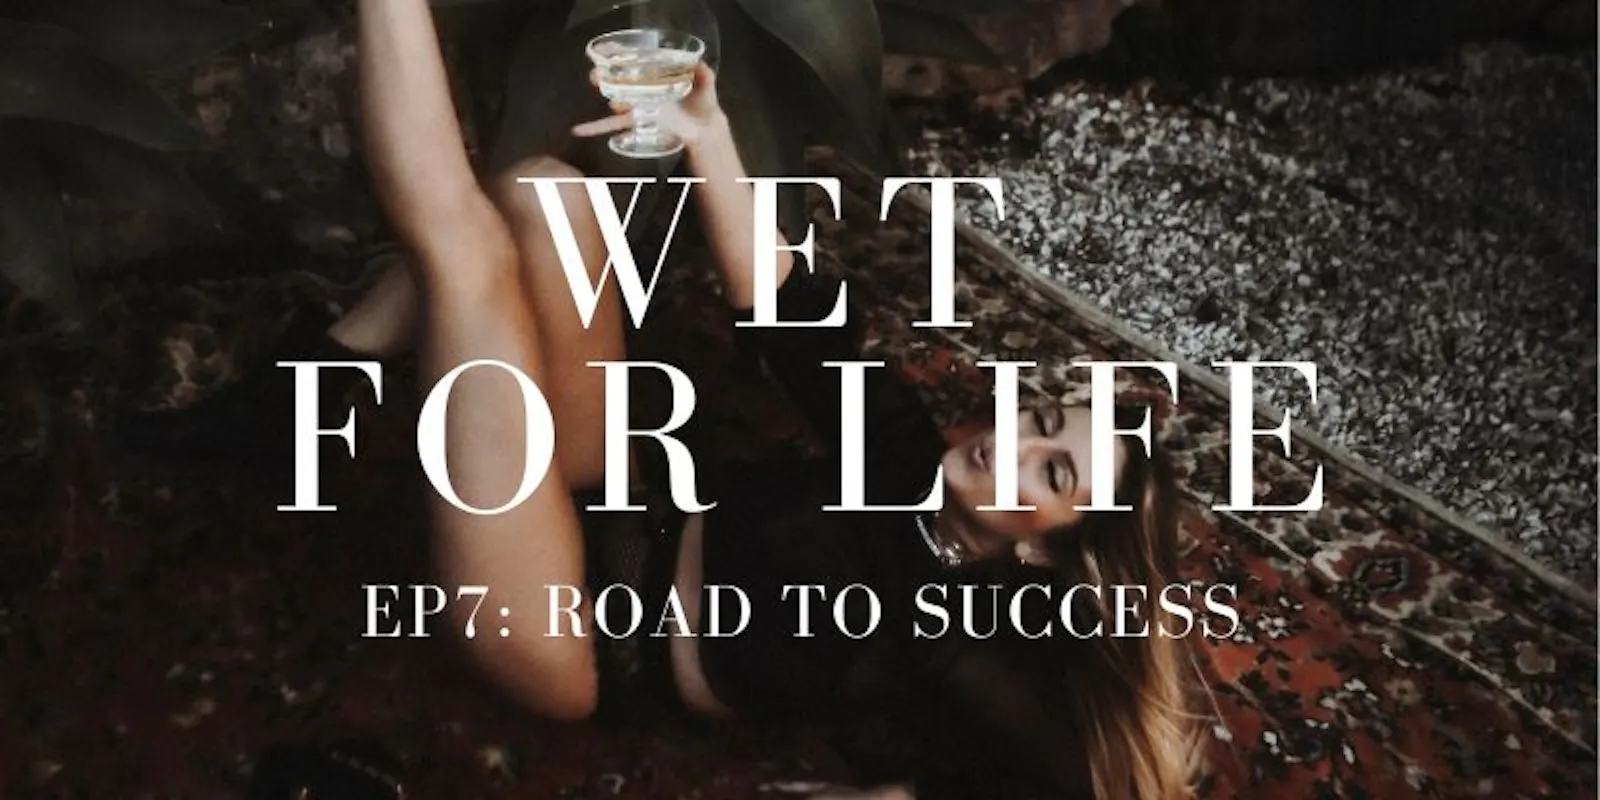 Podcast Elina Miller, Wet for Life, EP7 Road to success